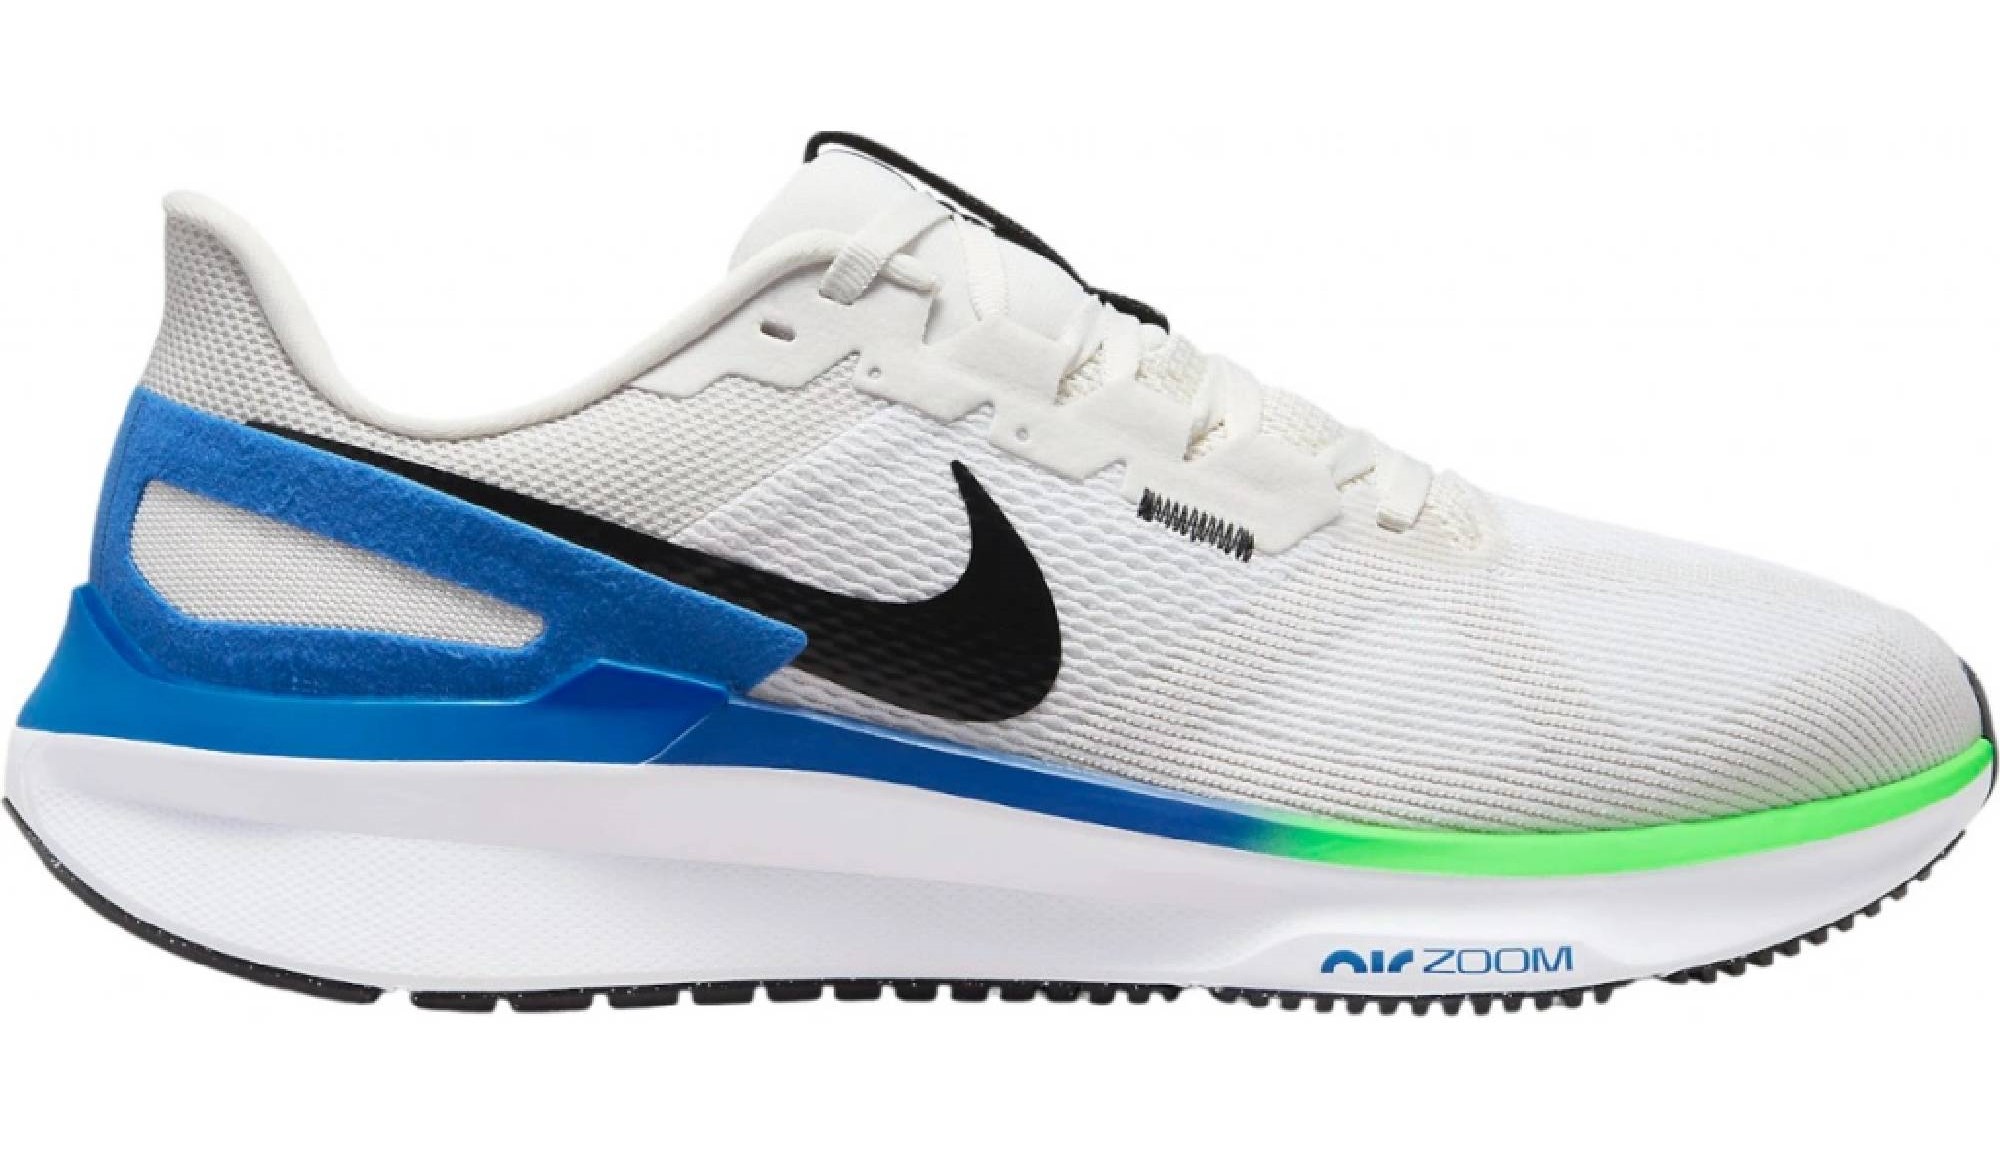 Nike Structure 25 Velikost: 42,5 EUR